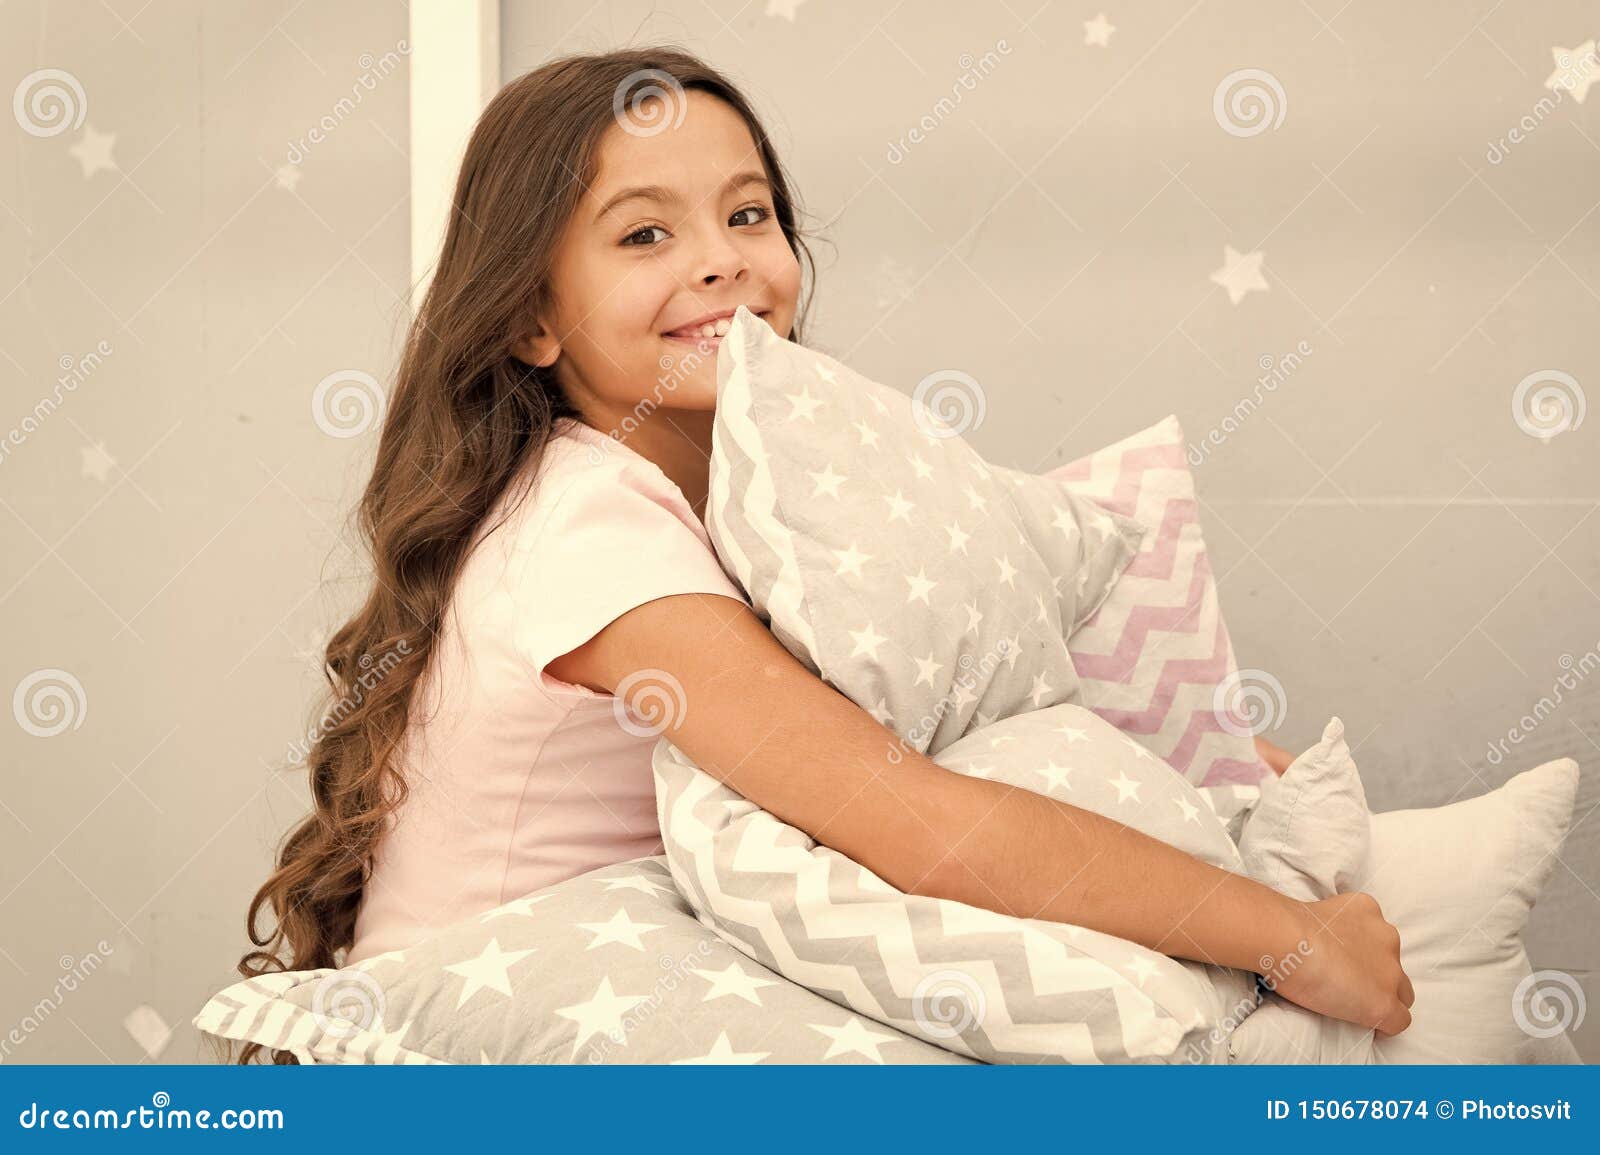 5 258 Pillow Kids Photos Free Royalty Free Stock Photos From Dreamstime